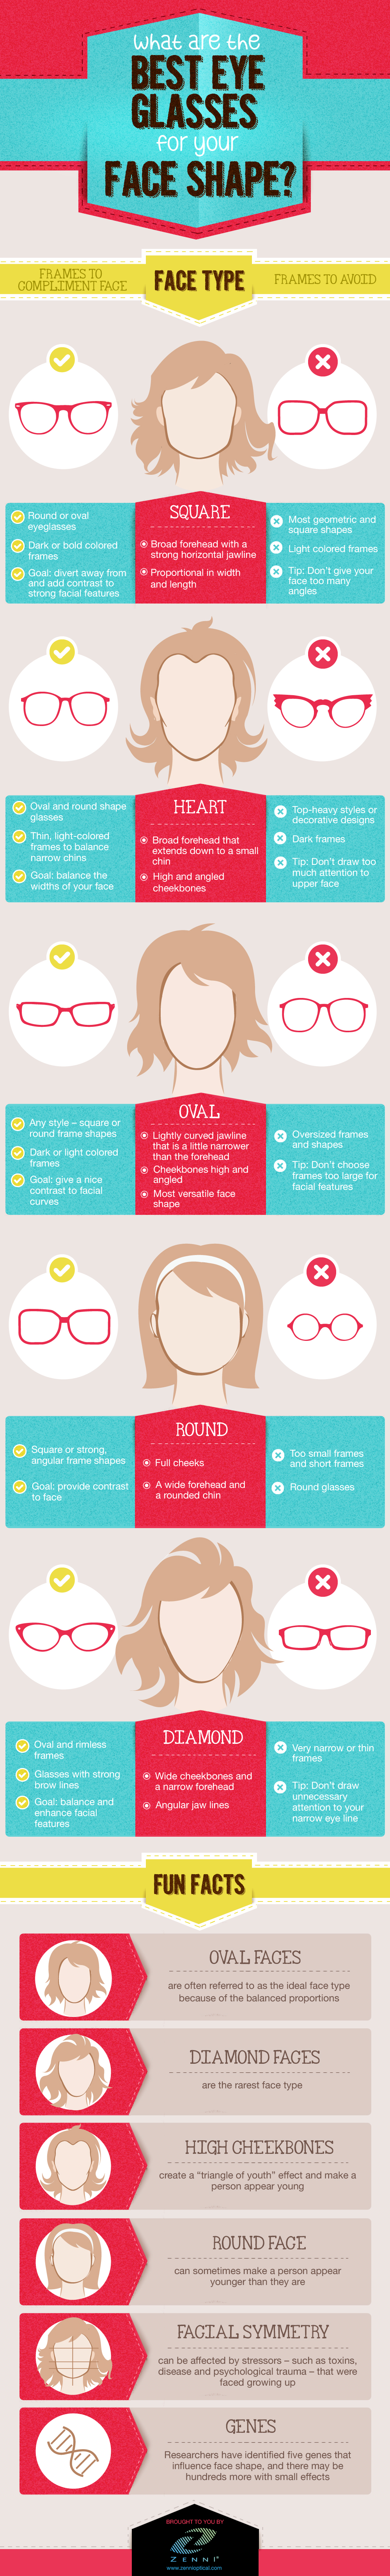 What are the Best Eyeglasses for Your Face Shape?